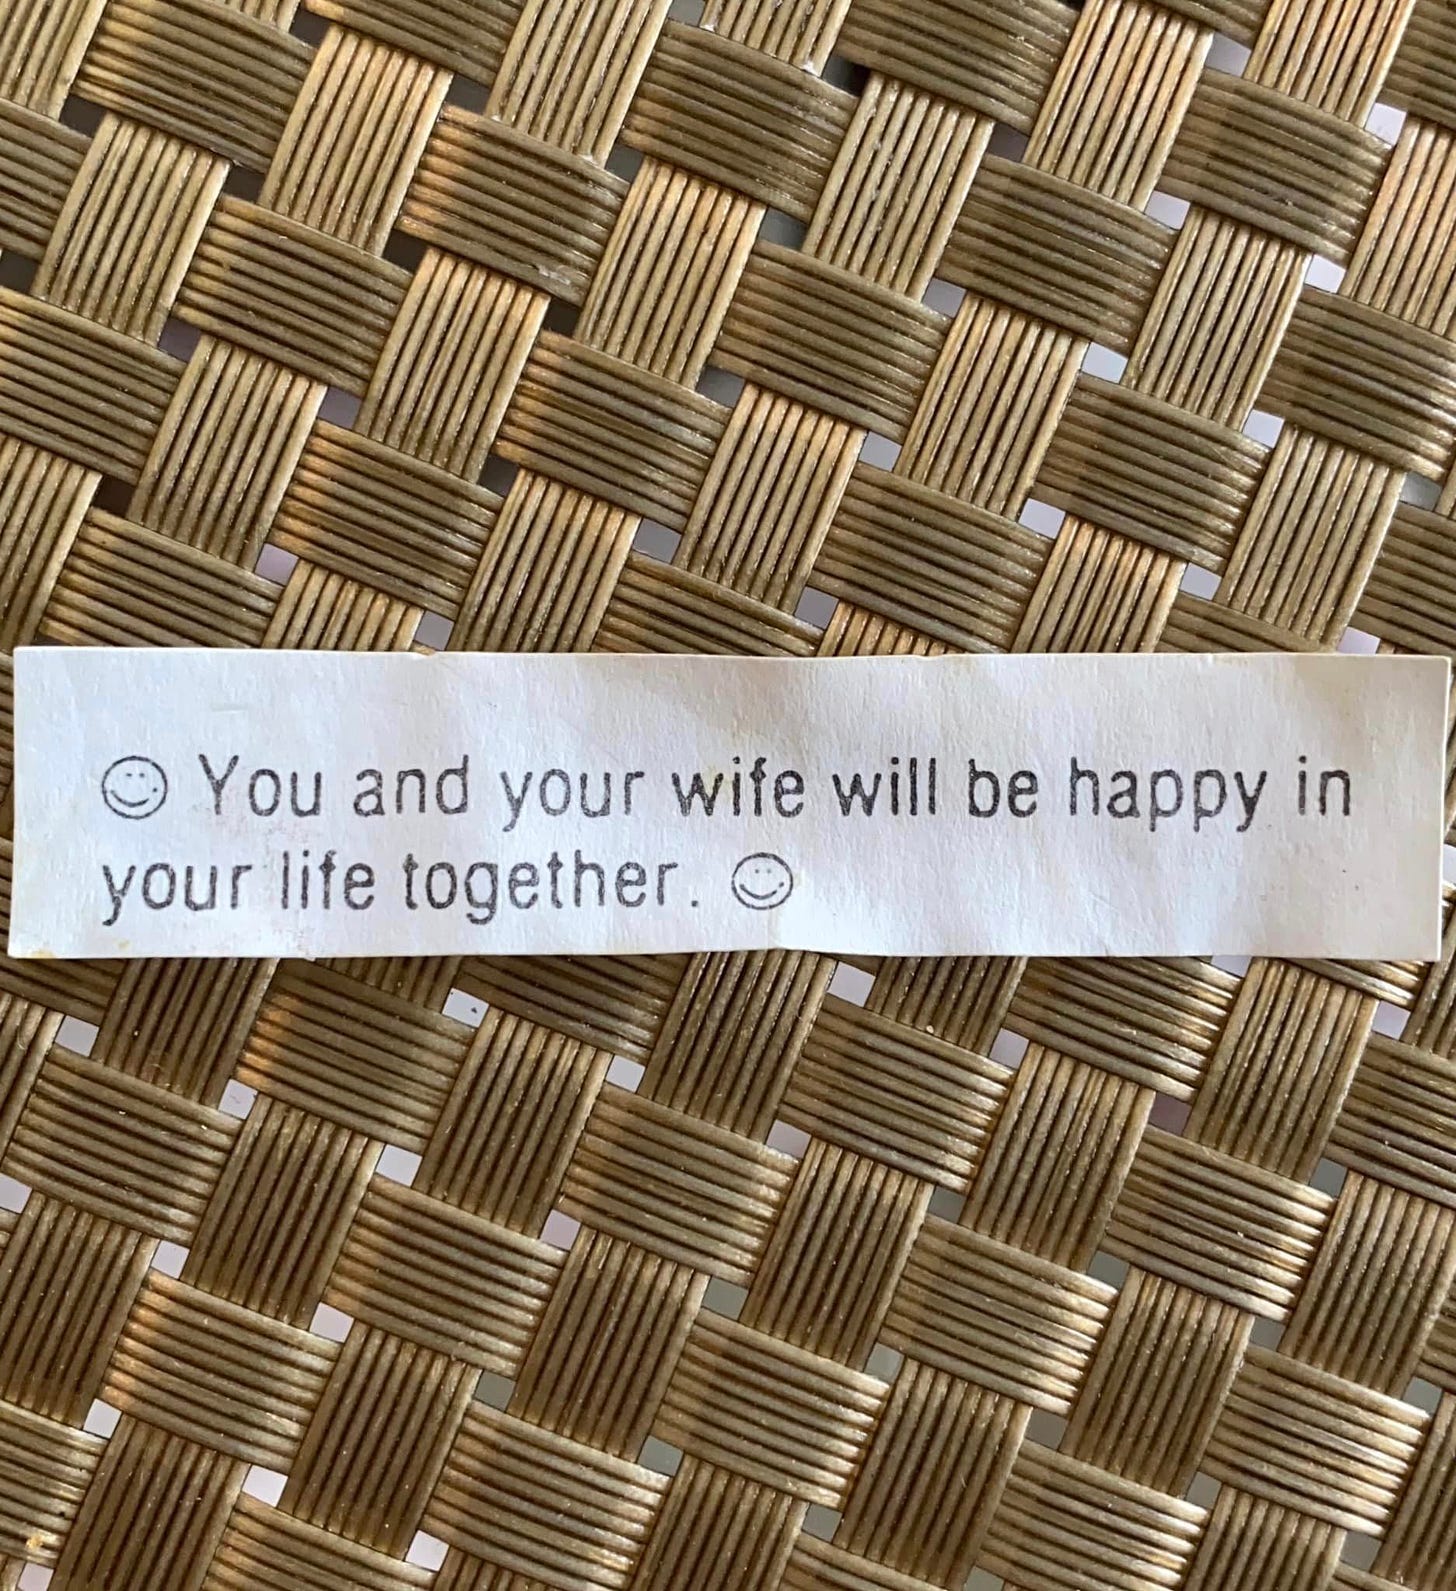 May be an image of text that says 'You and your wife will be happy in your life together'